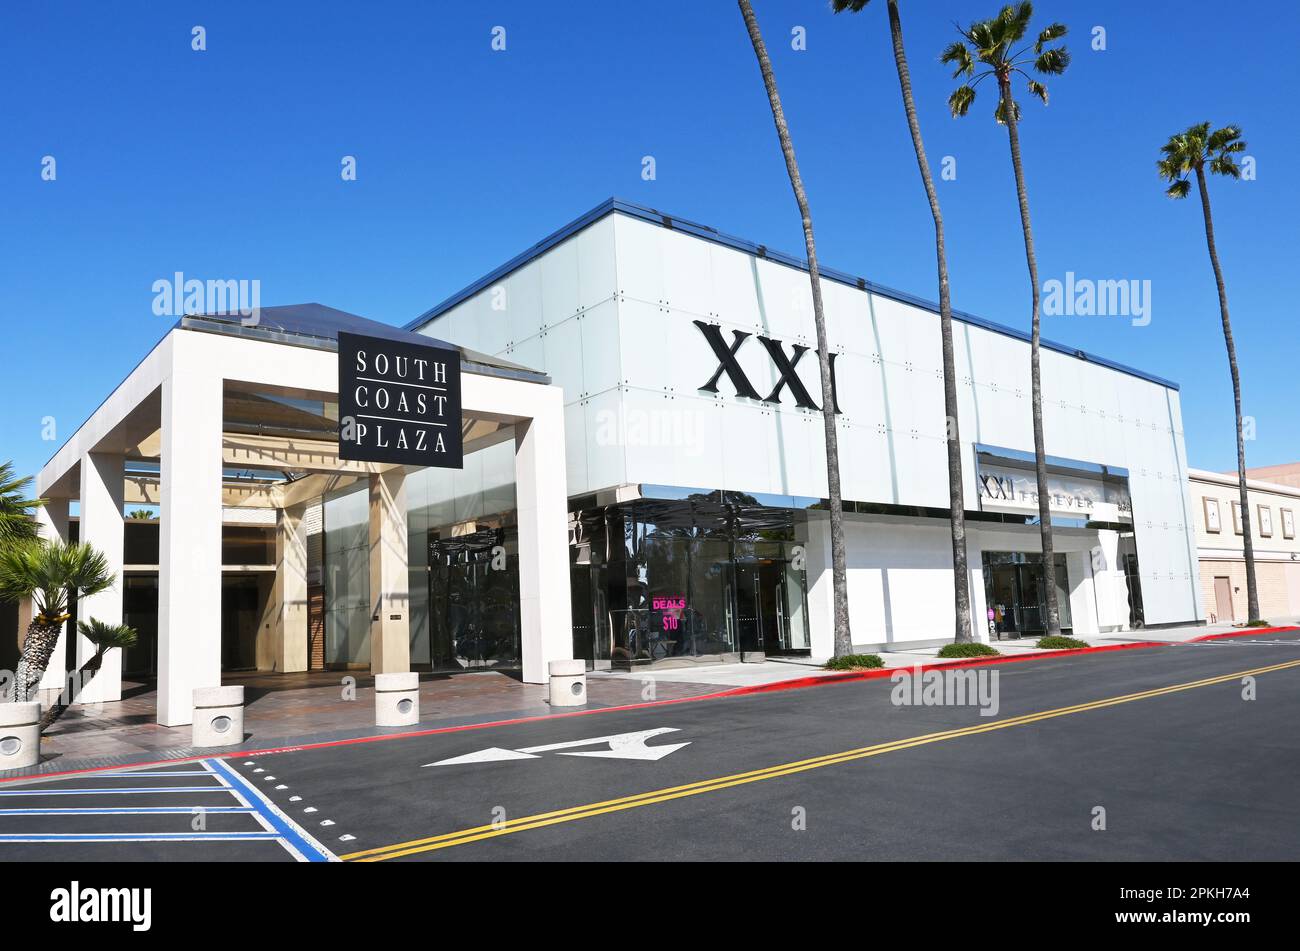 What's New at South Coast Plaza in Costa Mesa - Travel Costa Mesa